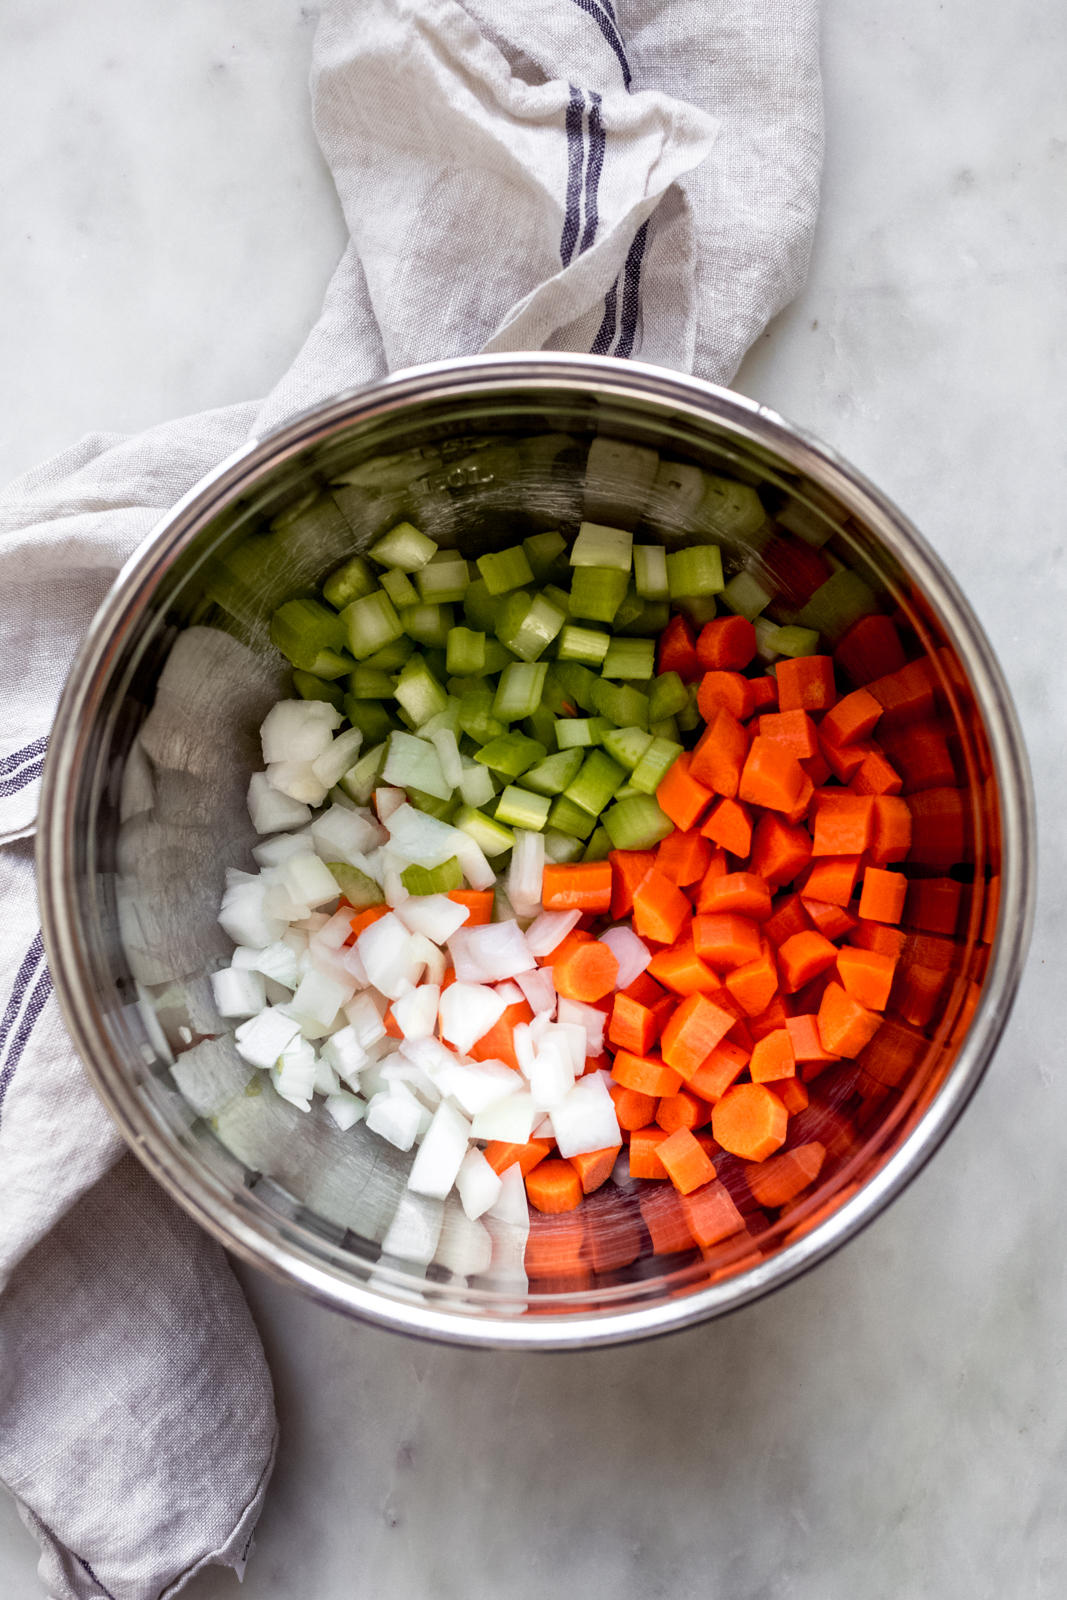 chopped onions, carrots, and celery in a stainless steel bowl